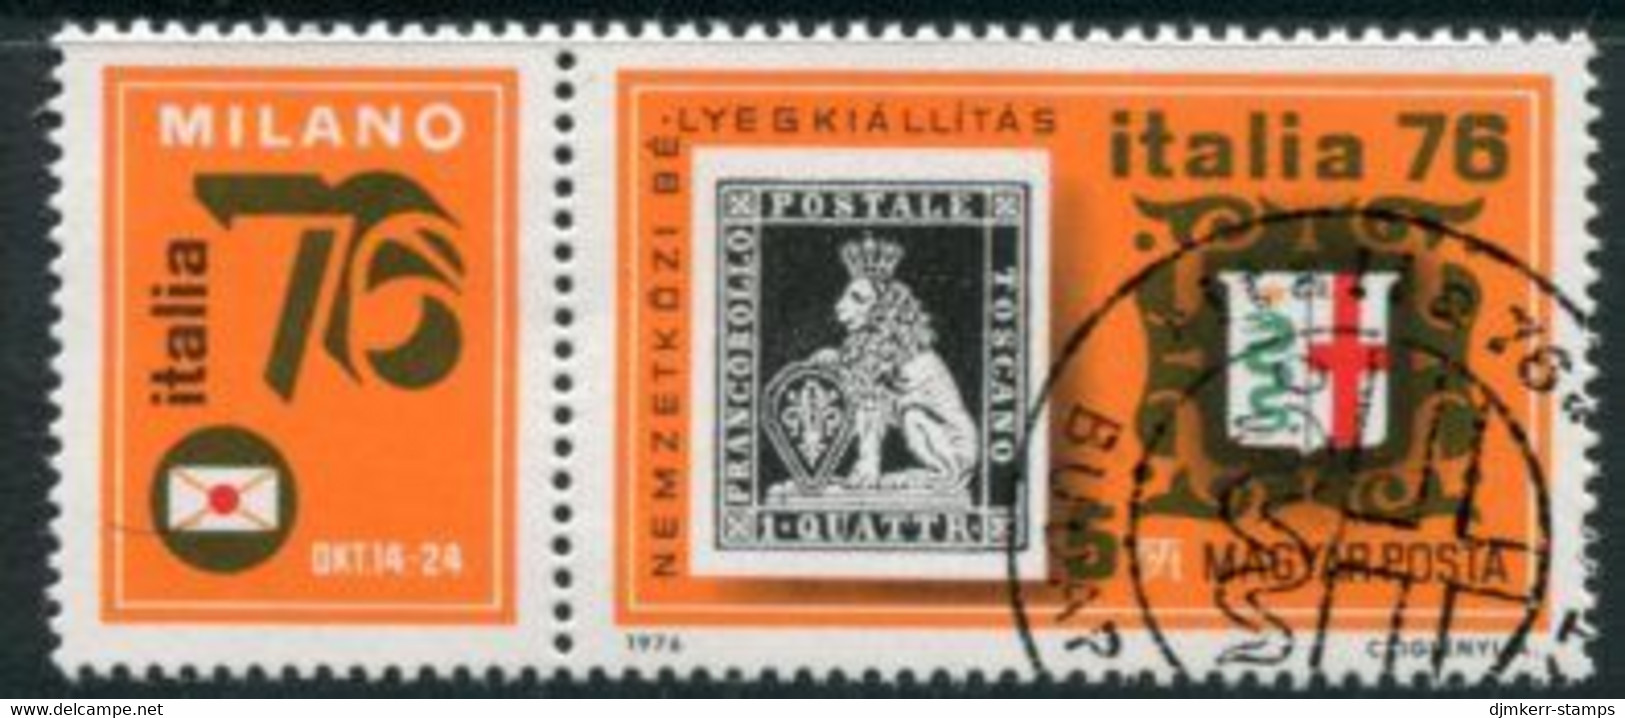 HUNGARY 1976 ITALIA Stamp Exhibition  Used.  Michel 3143 - Oblitérés